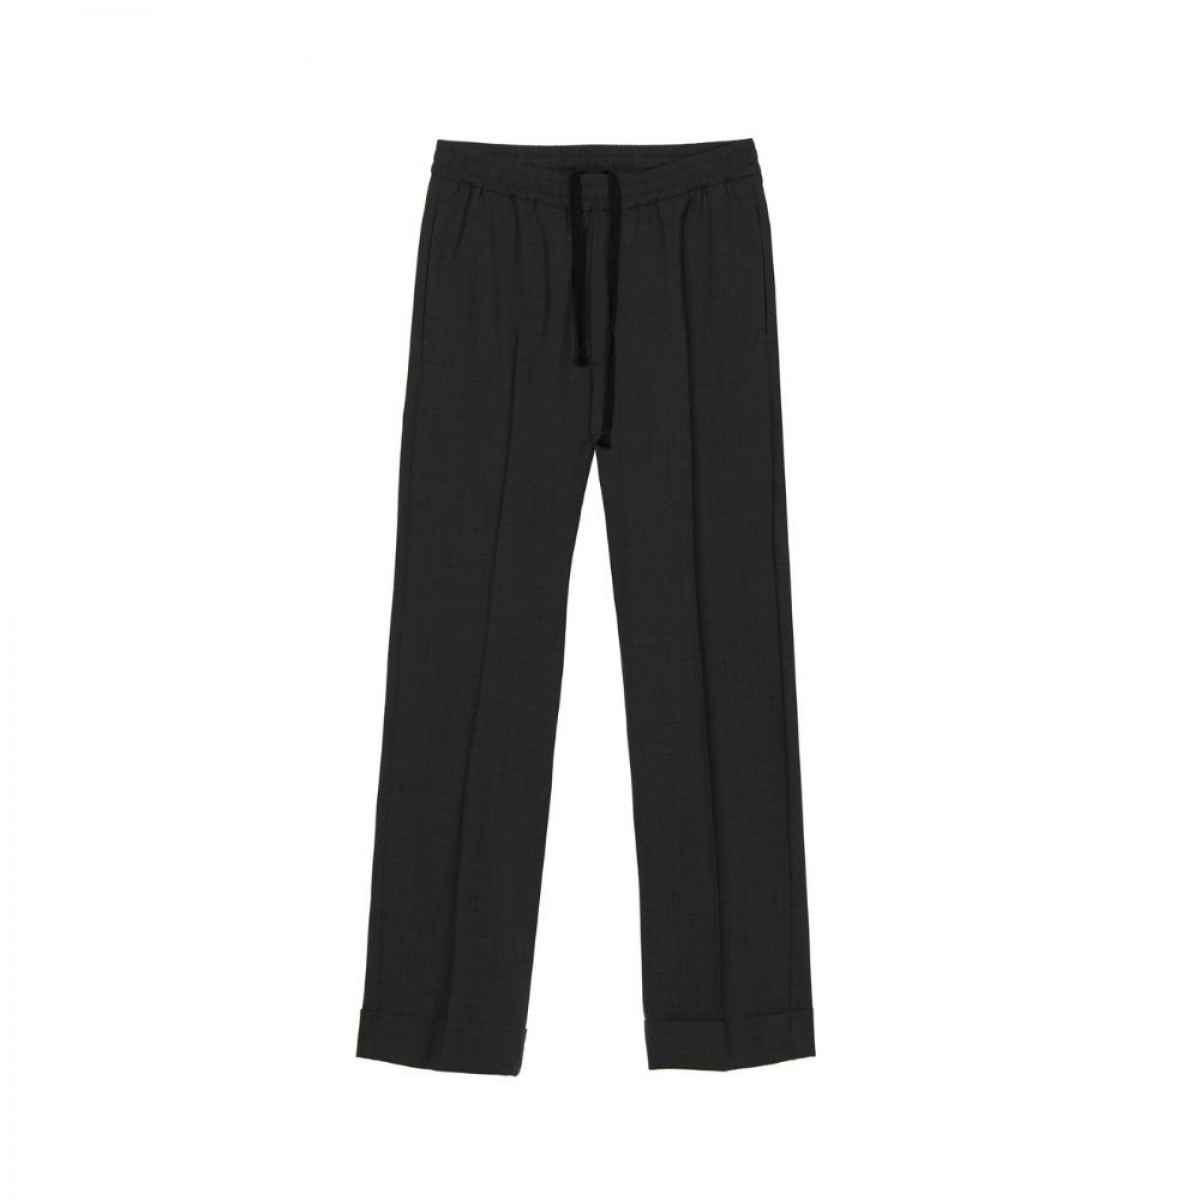 alfonso late pants - black - front